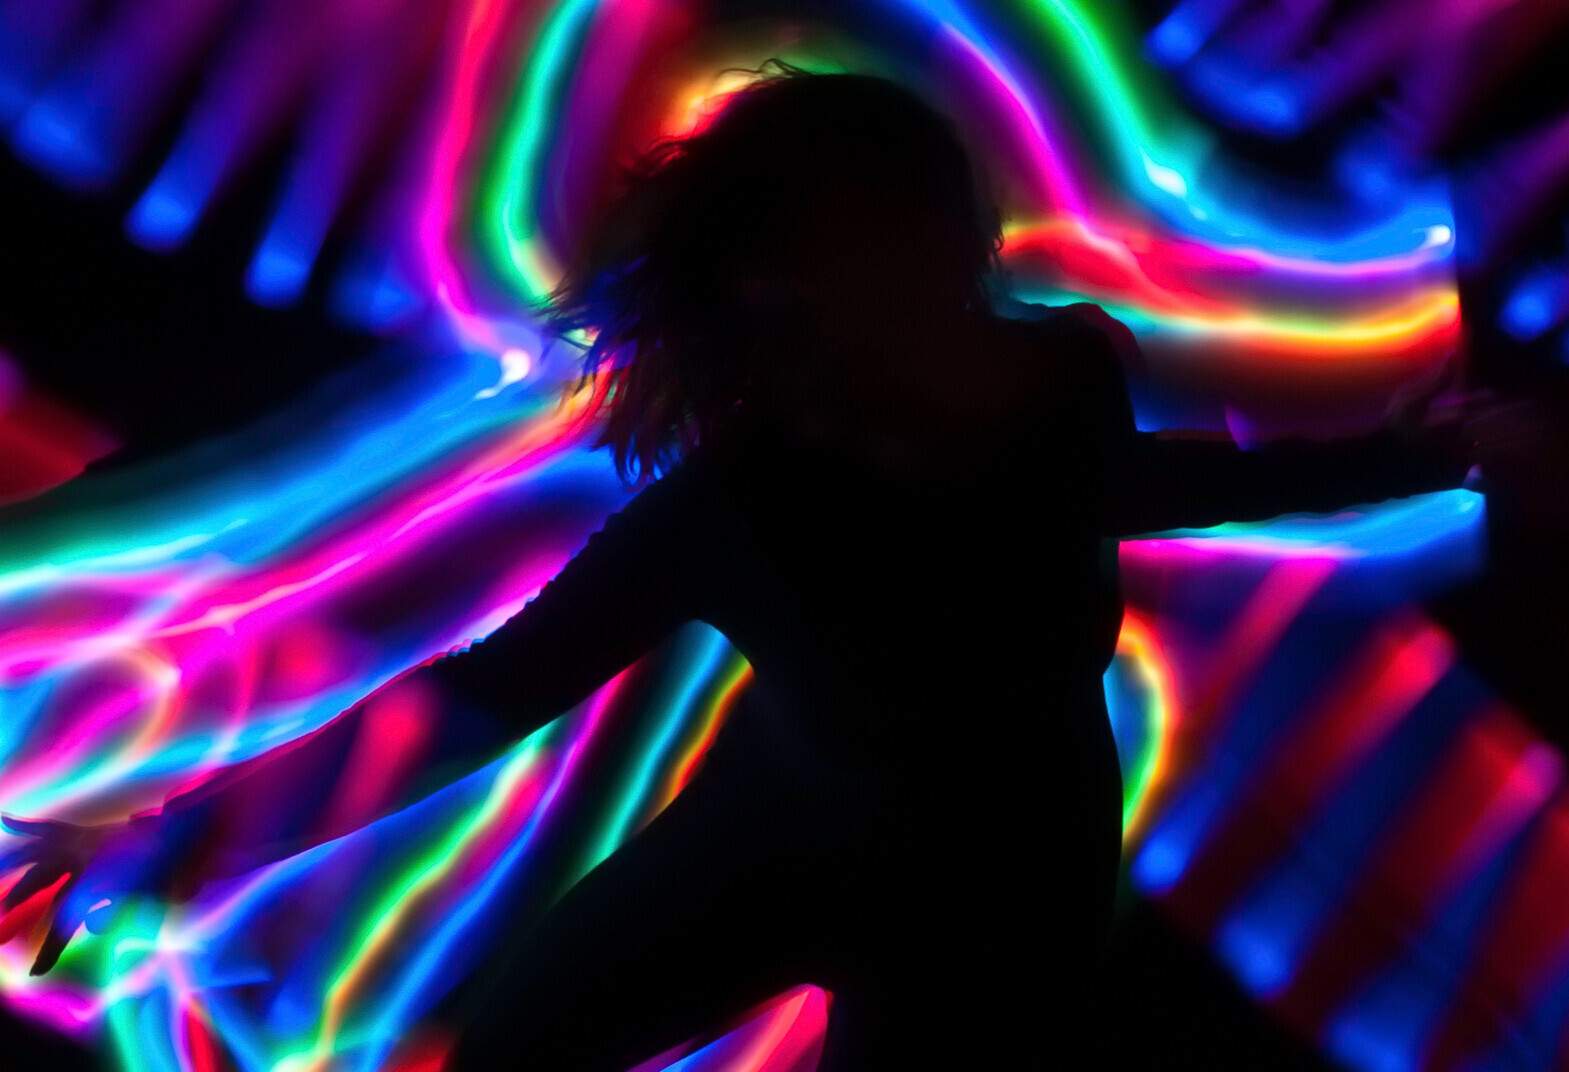 Silhouette of a person dancing against the streak of colourful neon lights.